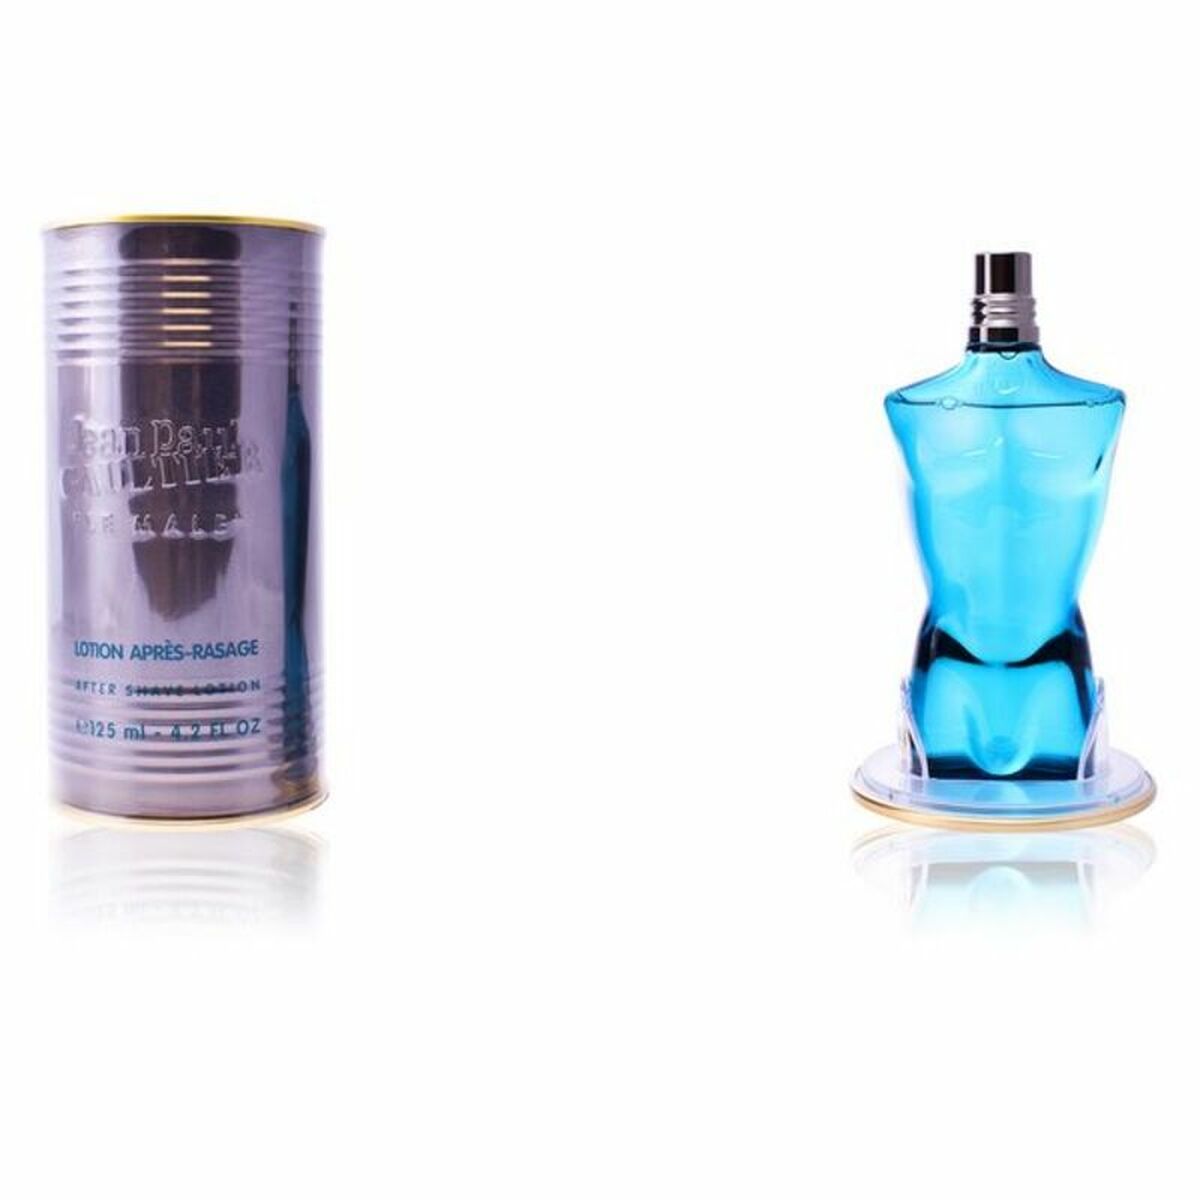 Kaufe Aftershave Lotion Le Male Jean Paul Gaultier 86119 125 ml 125 ml bei AWK Flagship um € 70.00